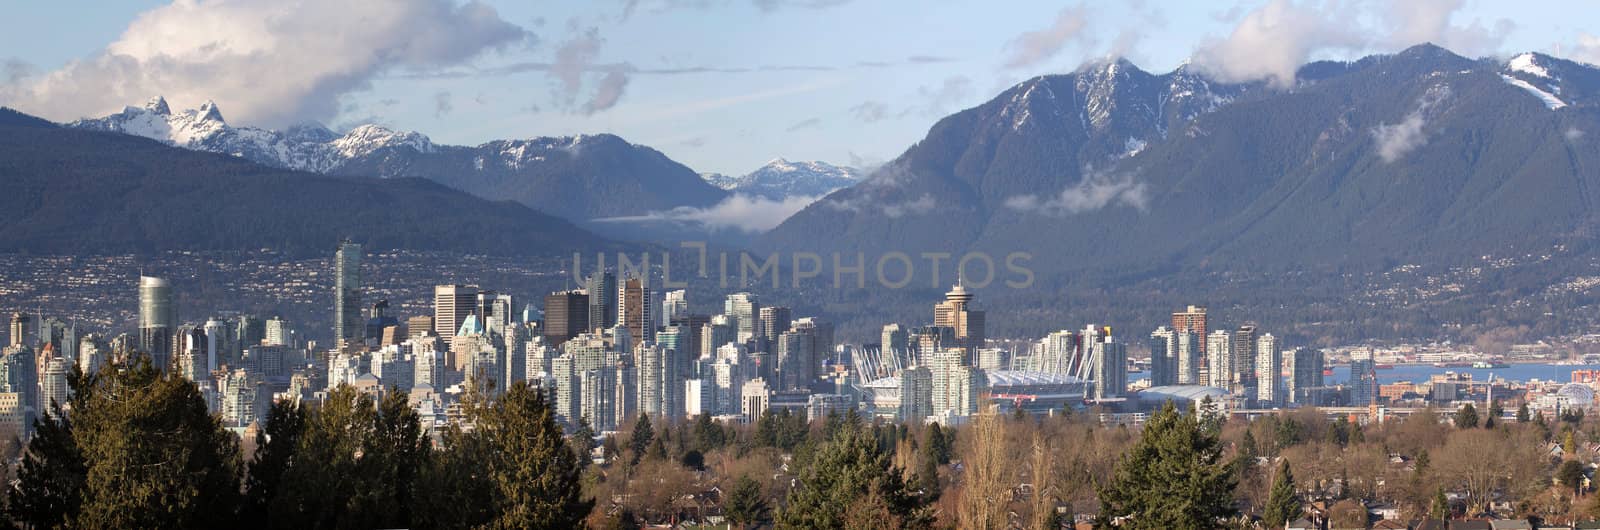 Vancouver BC City Skyline and Mountains by jpldesigns